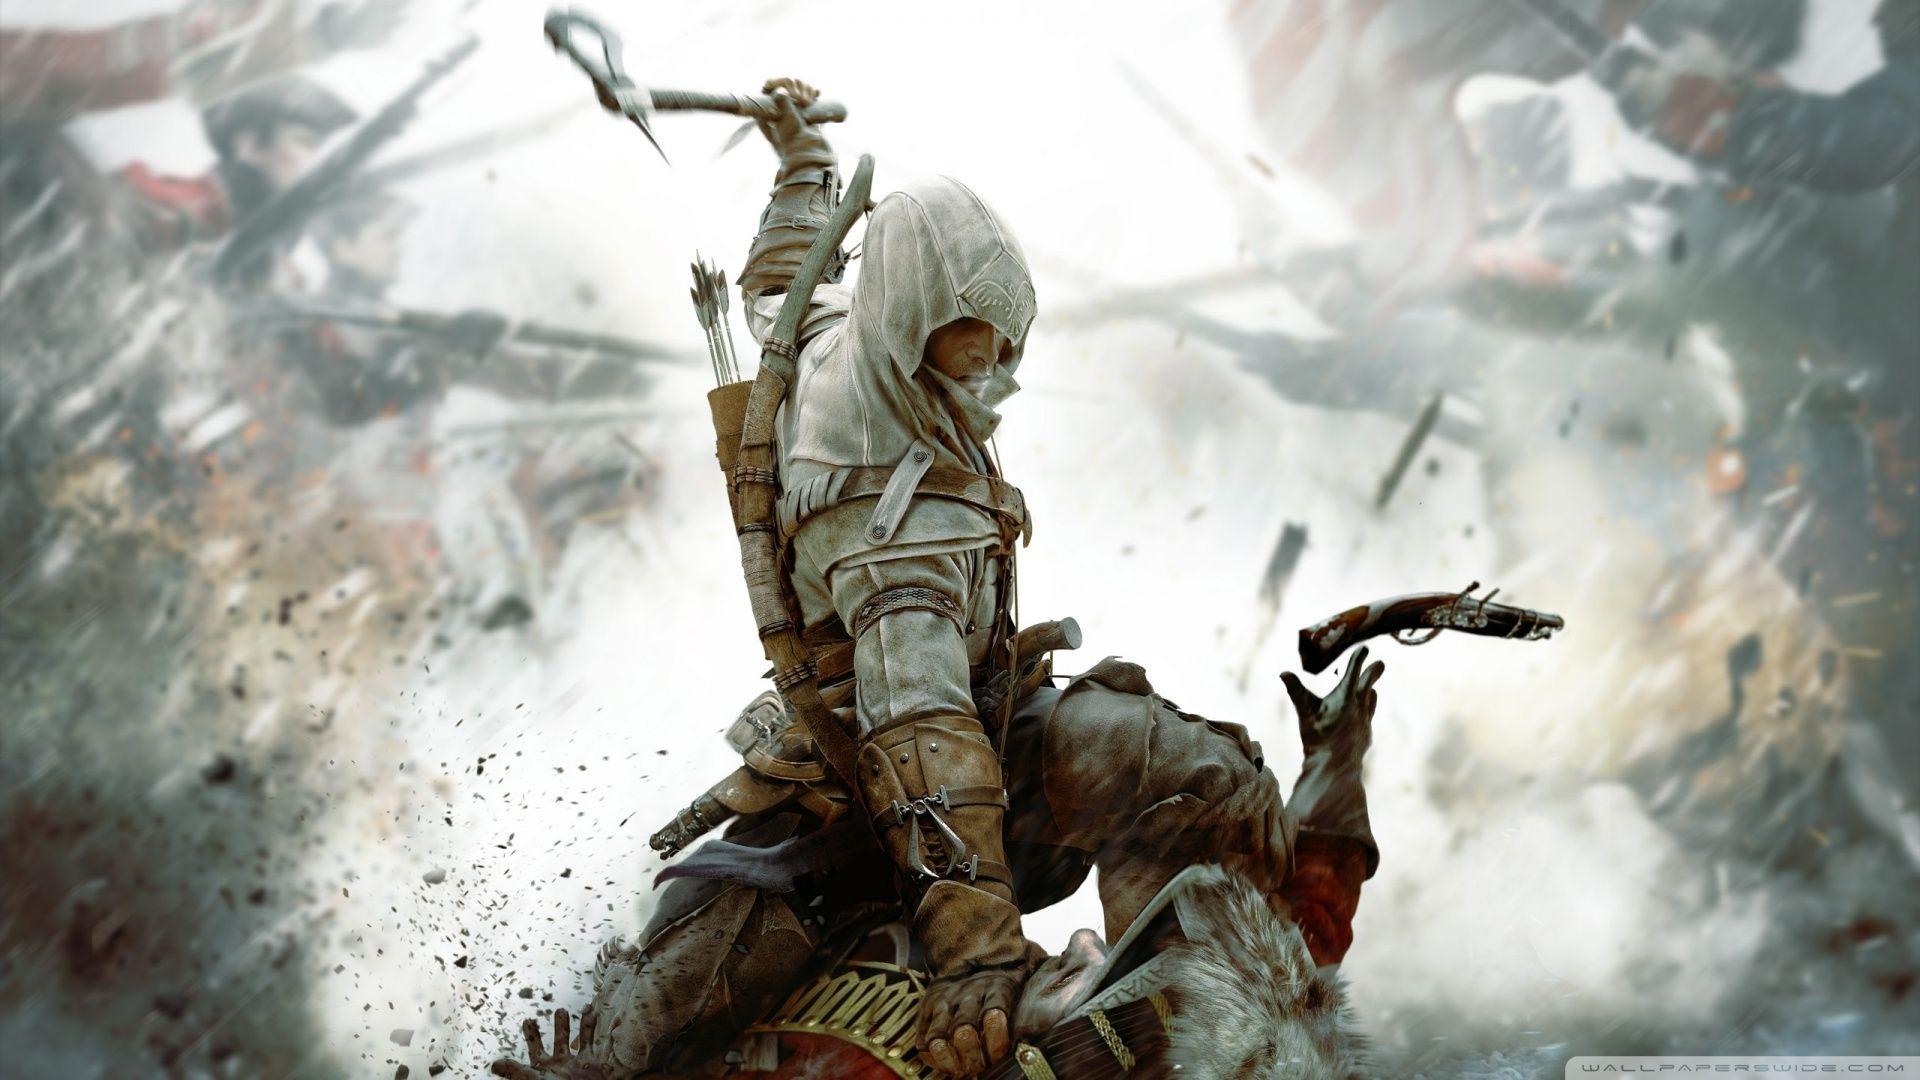 download assassin creed 3 free